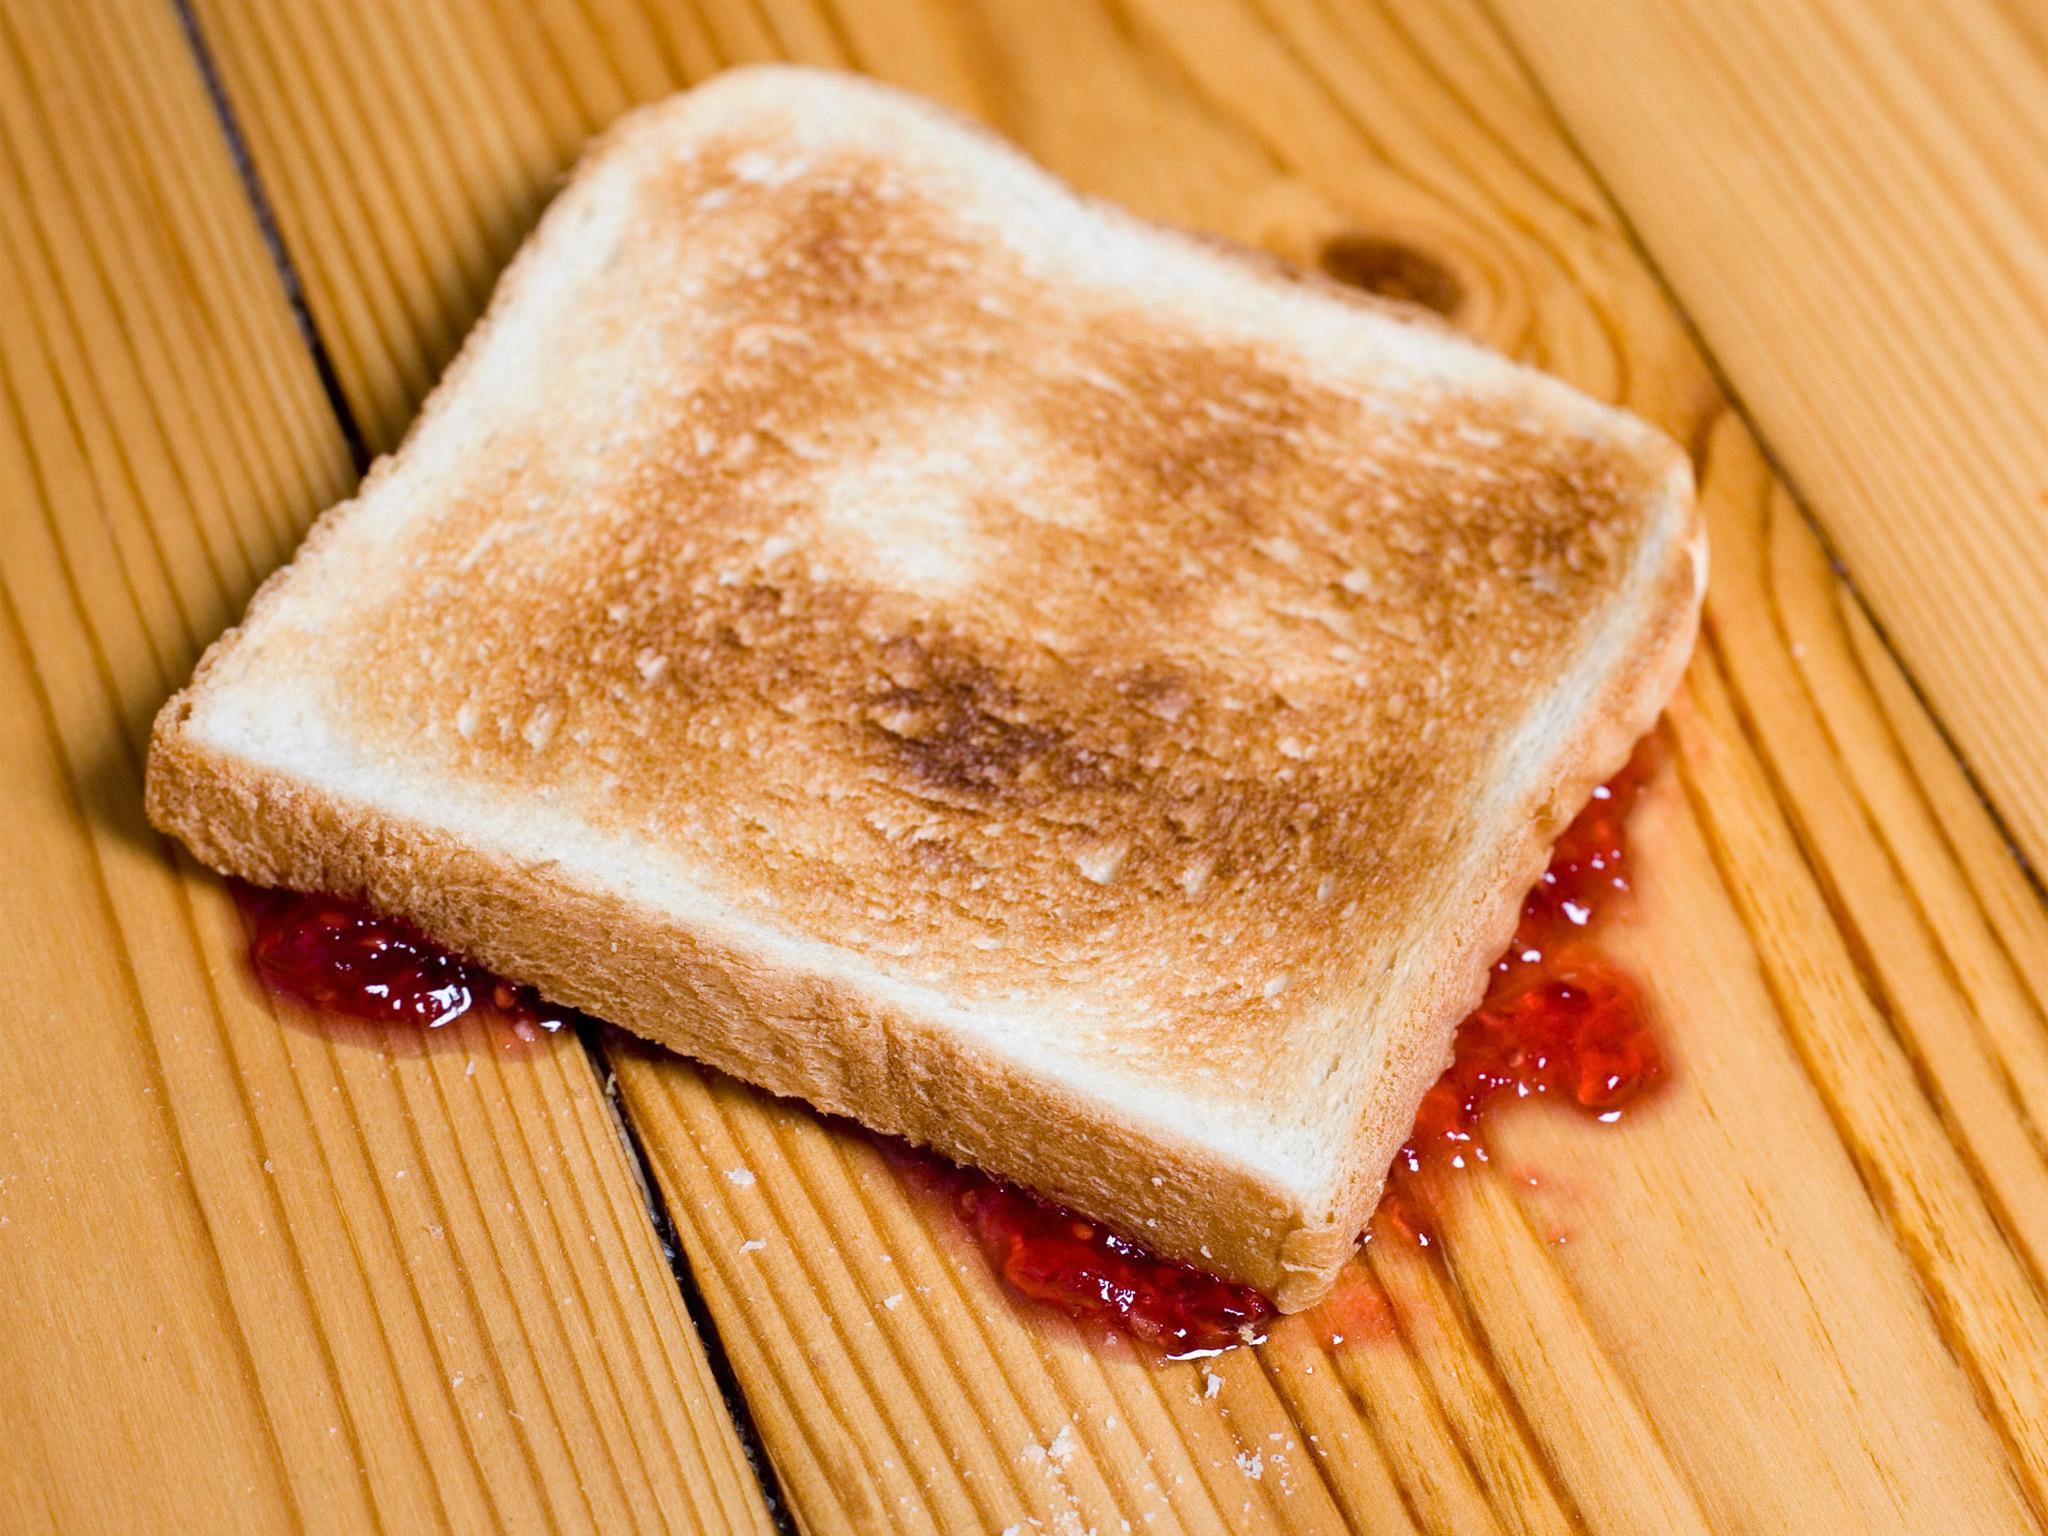 'Five-second rule' for food dropped on the floor approved by germ ... - The Independent